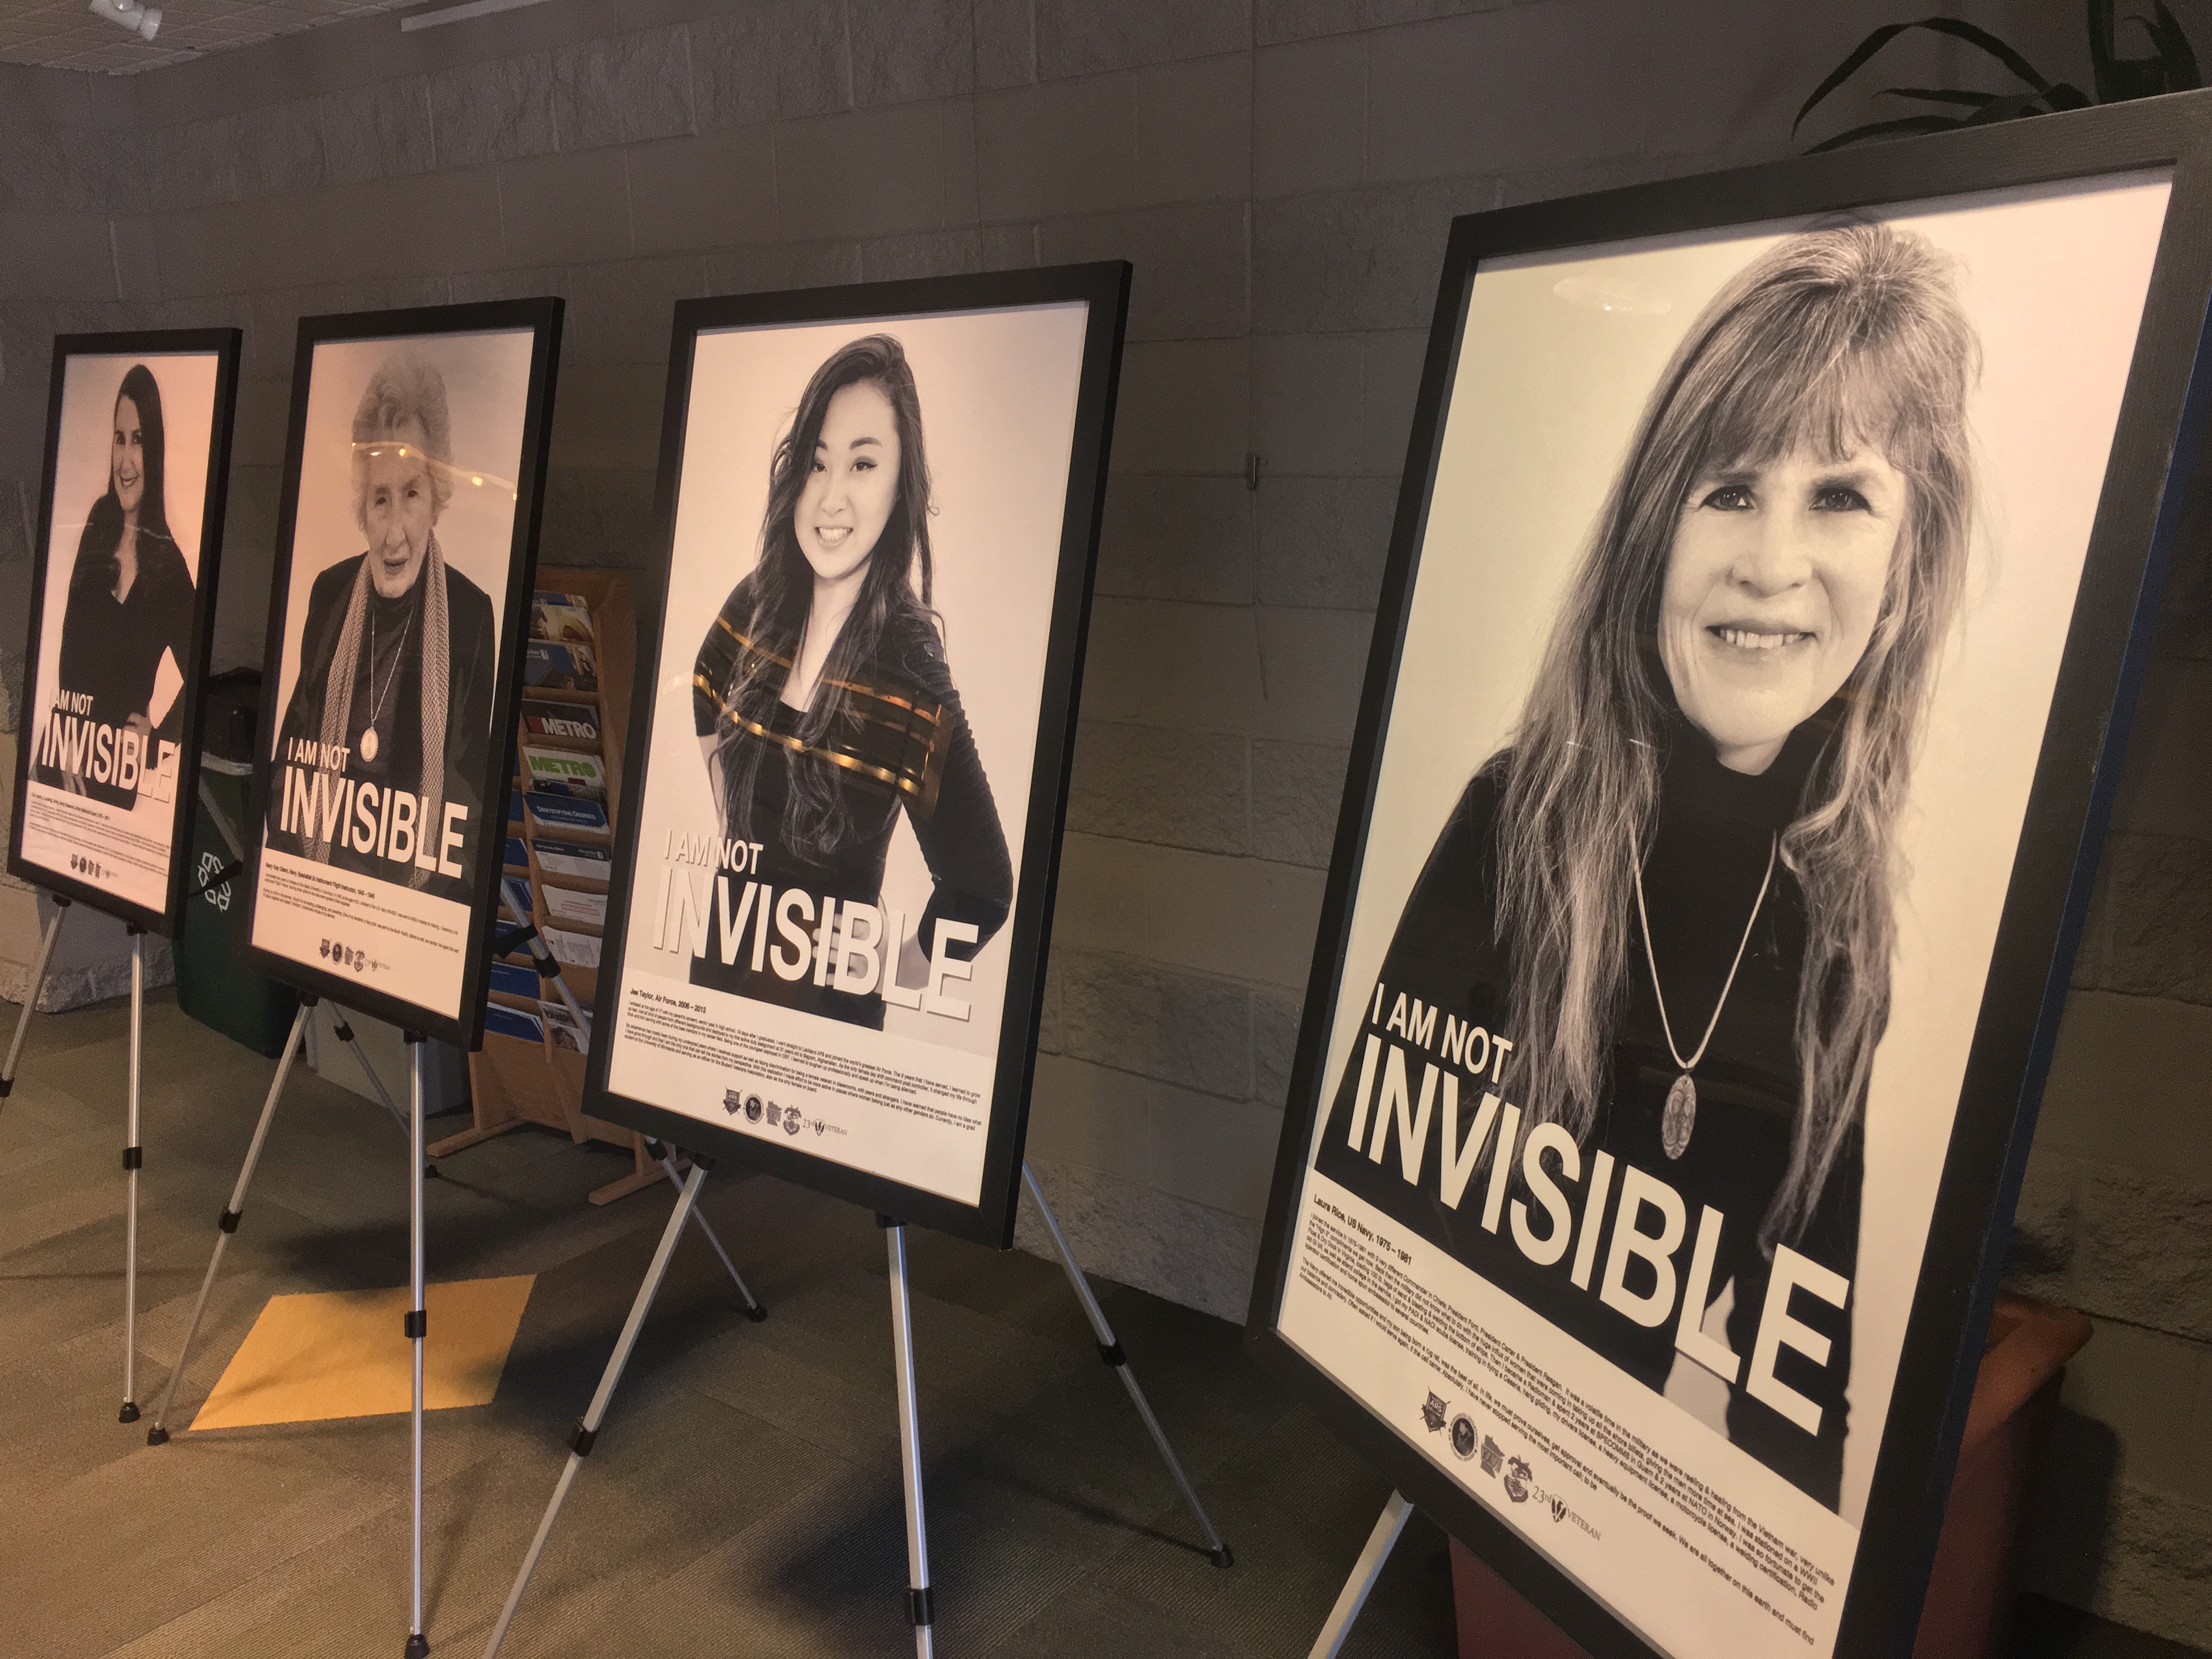 I Am Not Invisible awareness campaign posters